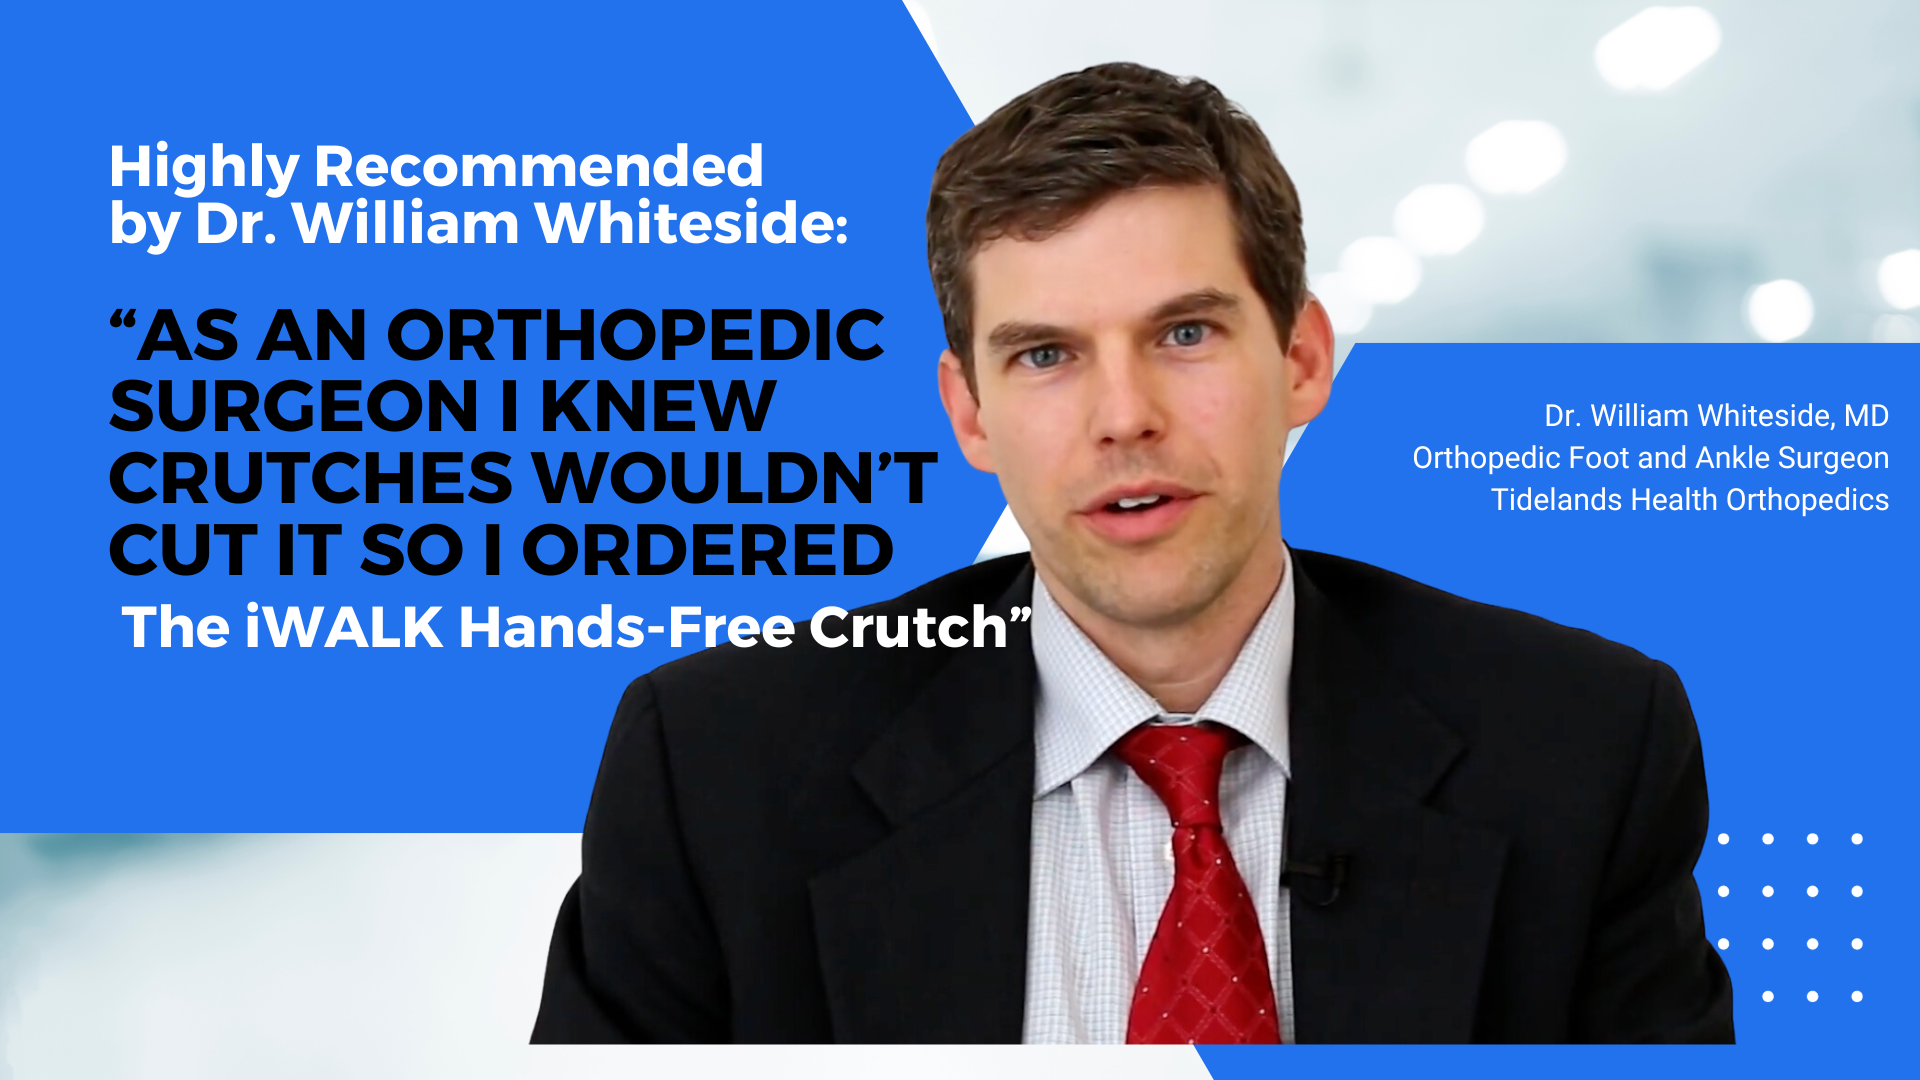 Dr. Williams Whiteside Orthopedic Surgeon recommends the iWALK Hands-Free Crutch